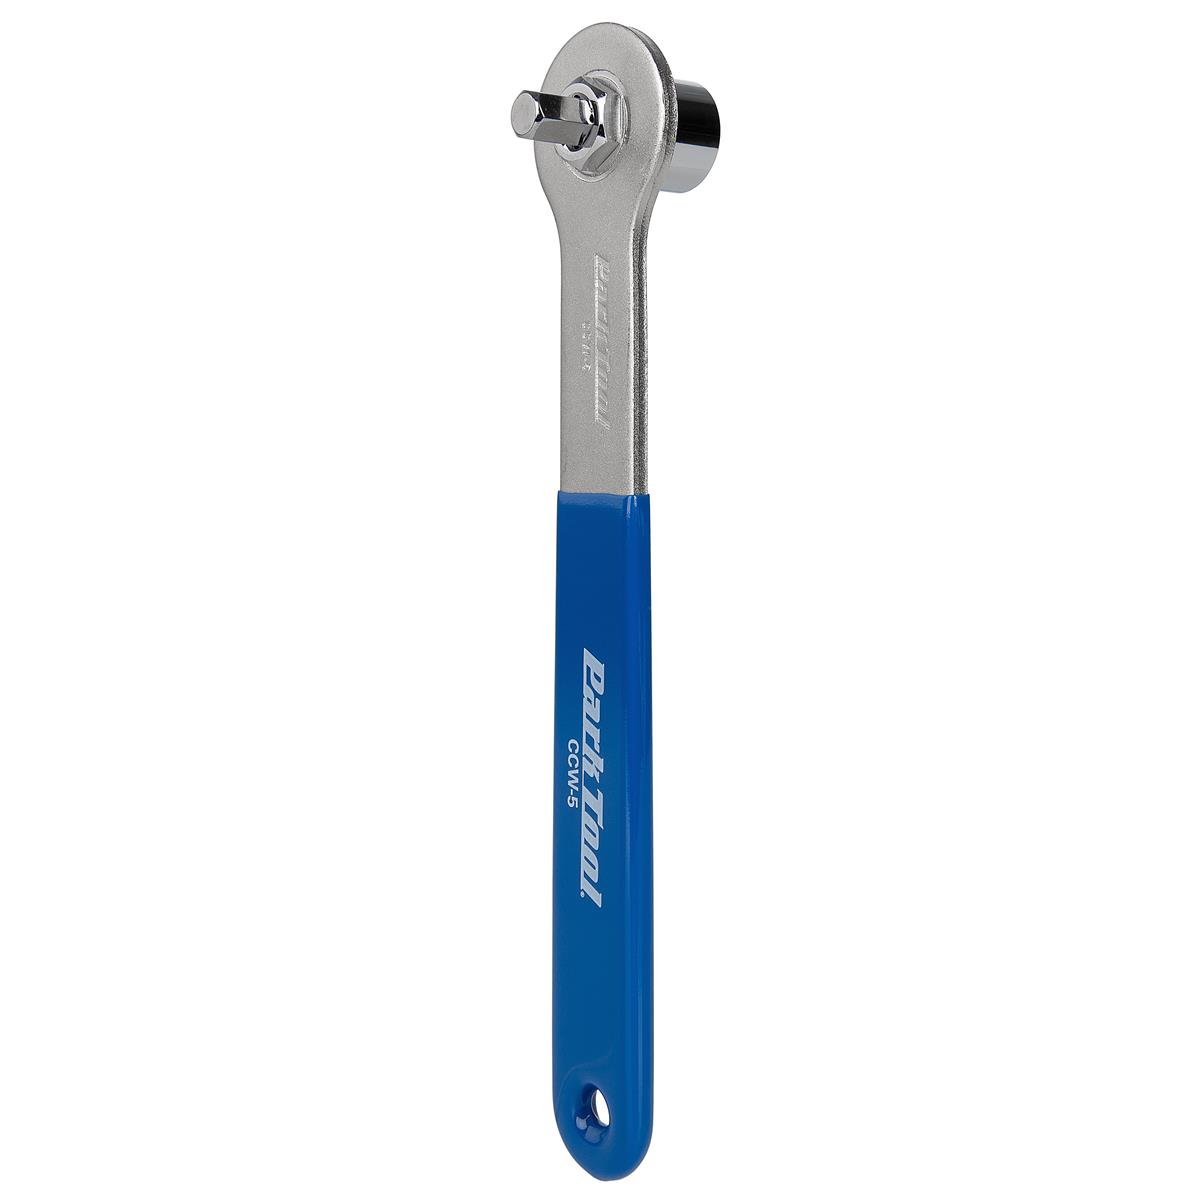 Park Tool Crank Bolt Wrench CCW-5 8 and 14 mm